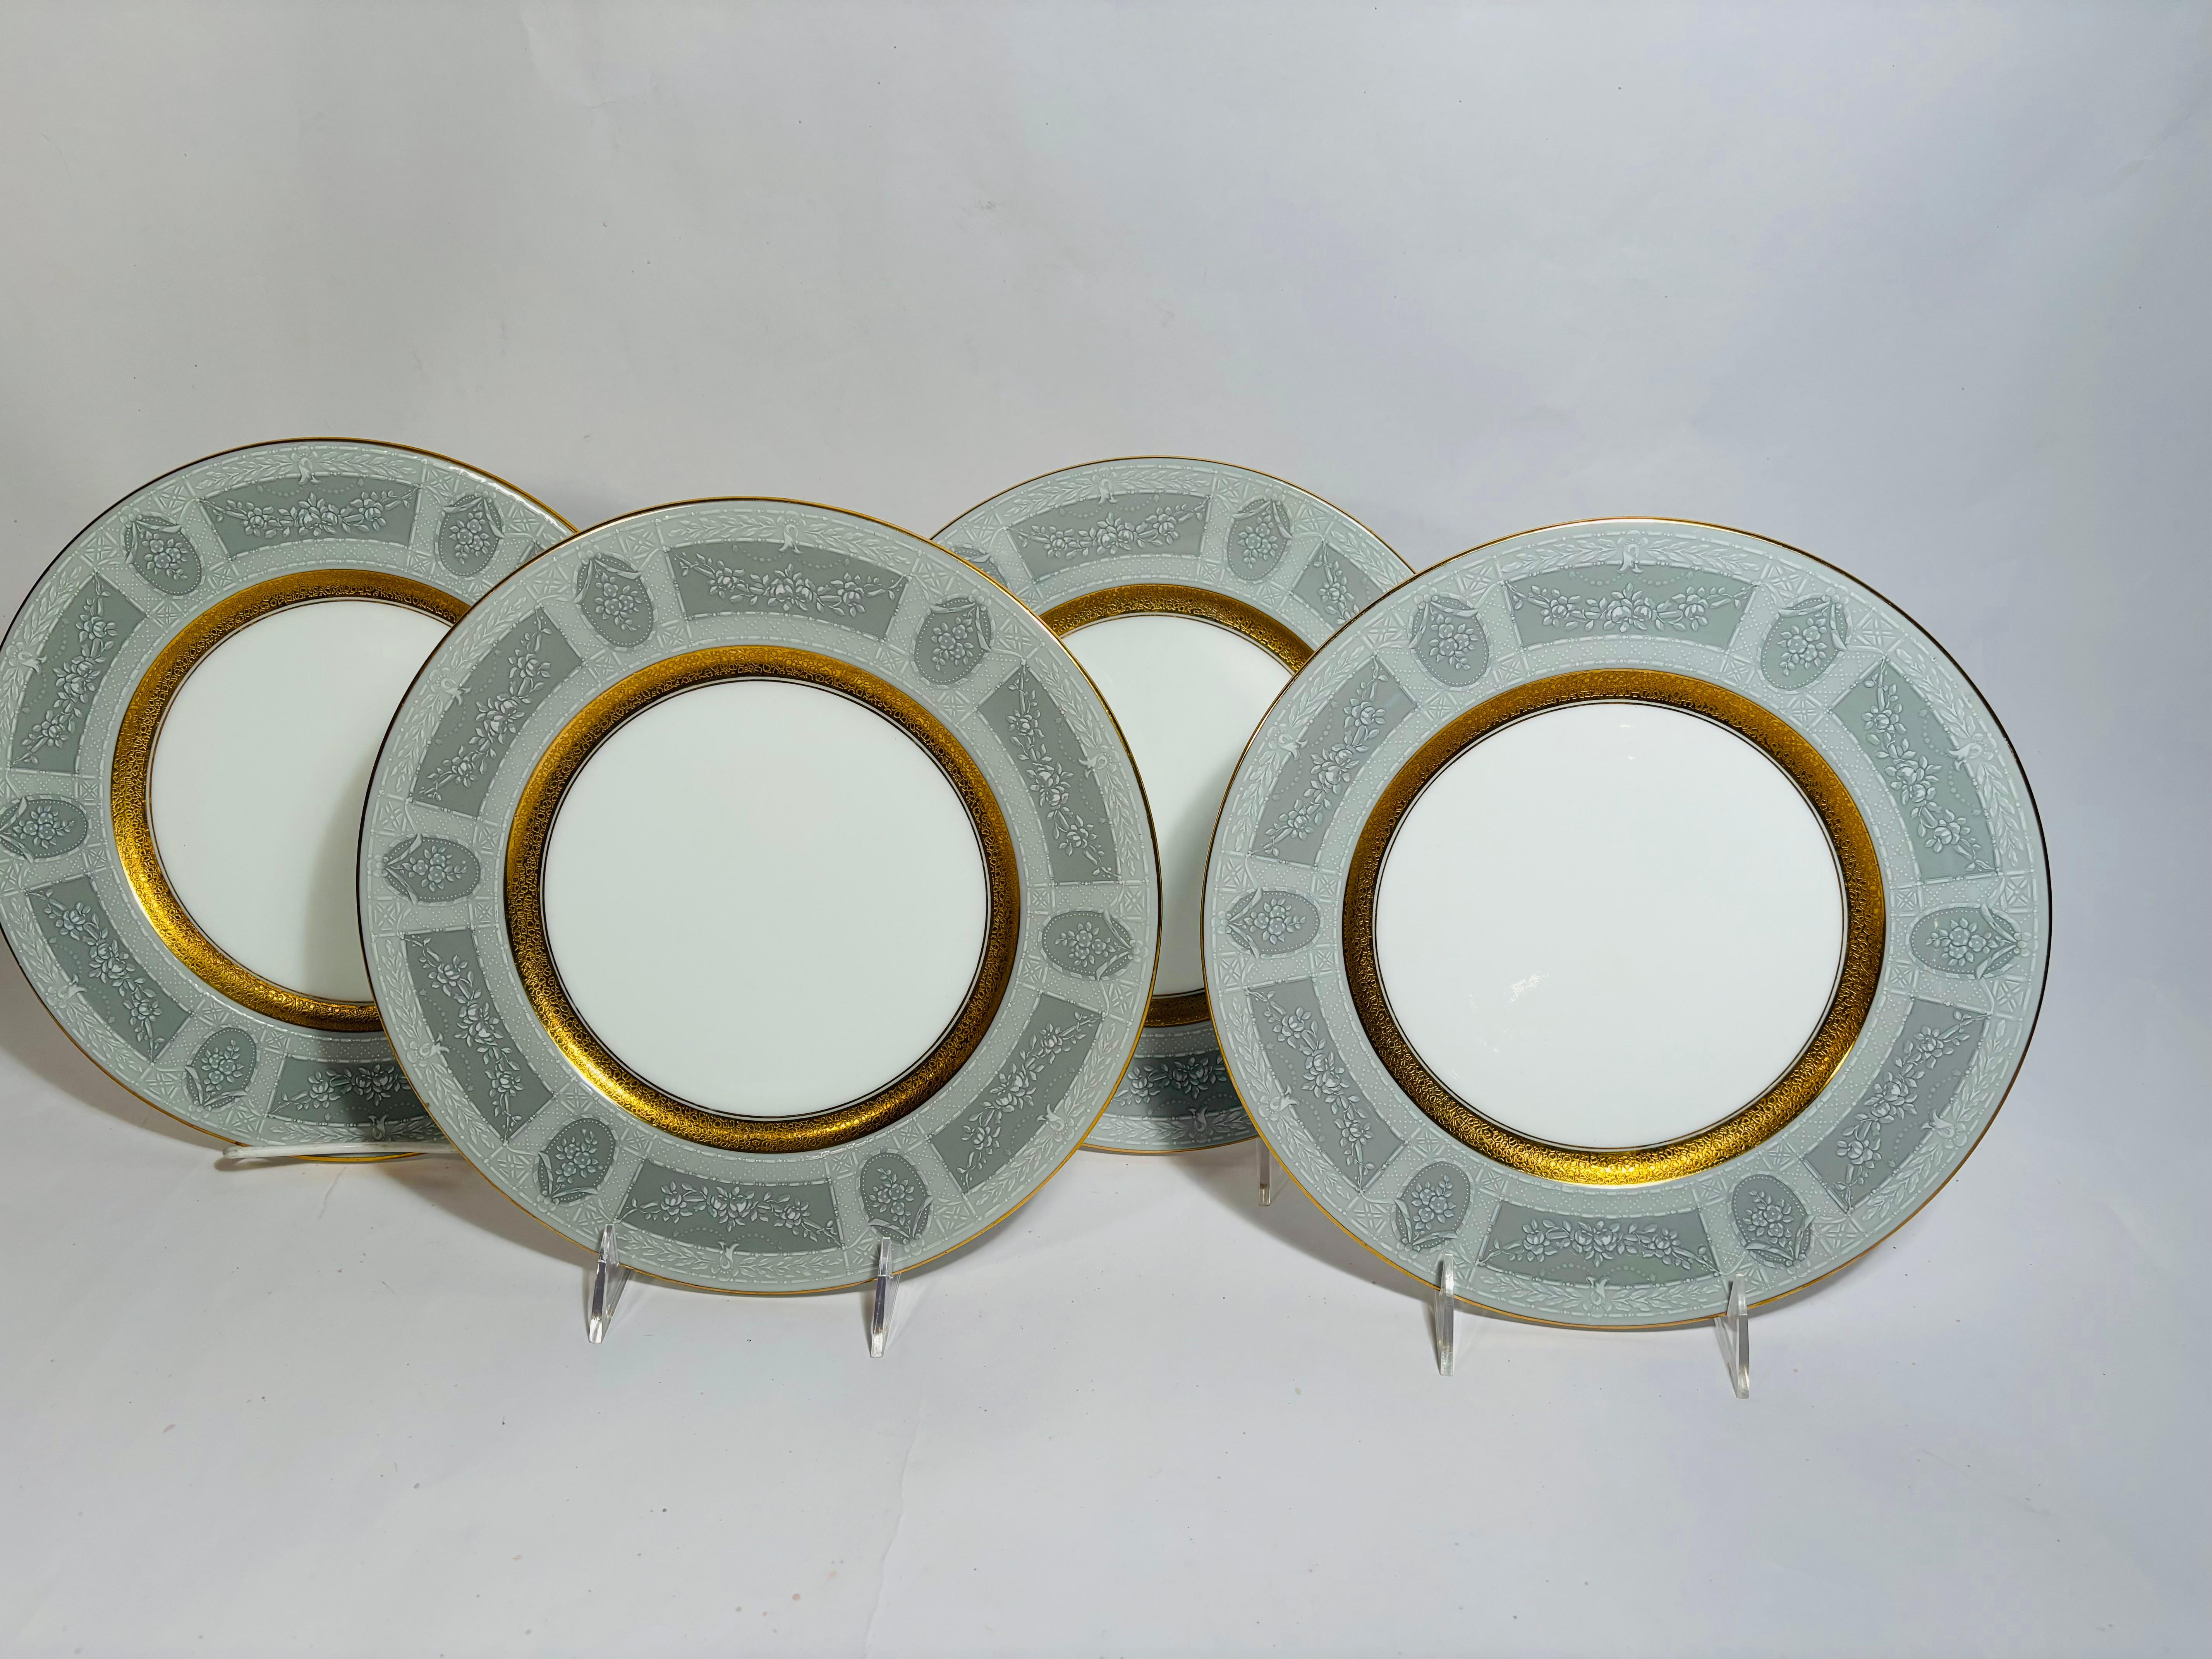 Hand-Crafted Set of 4 Antique Coalport England White French Enameling on Grey Dinner Plates